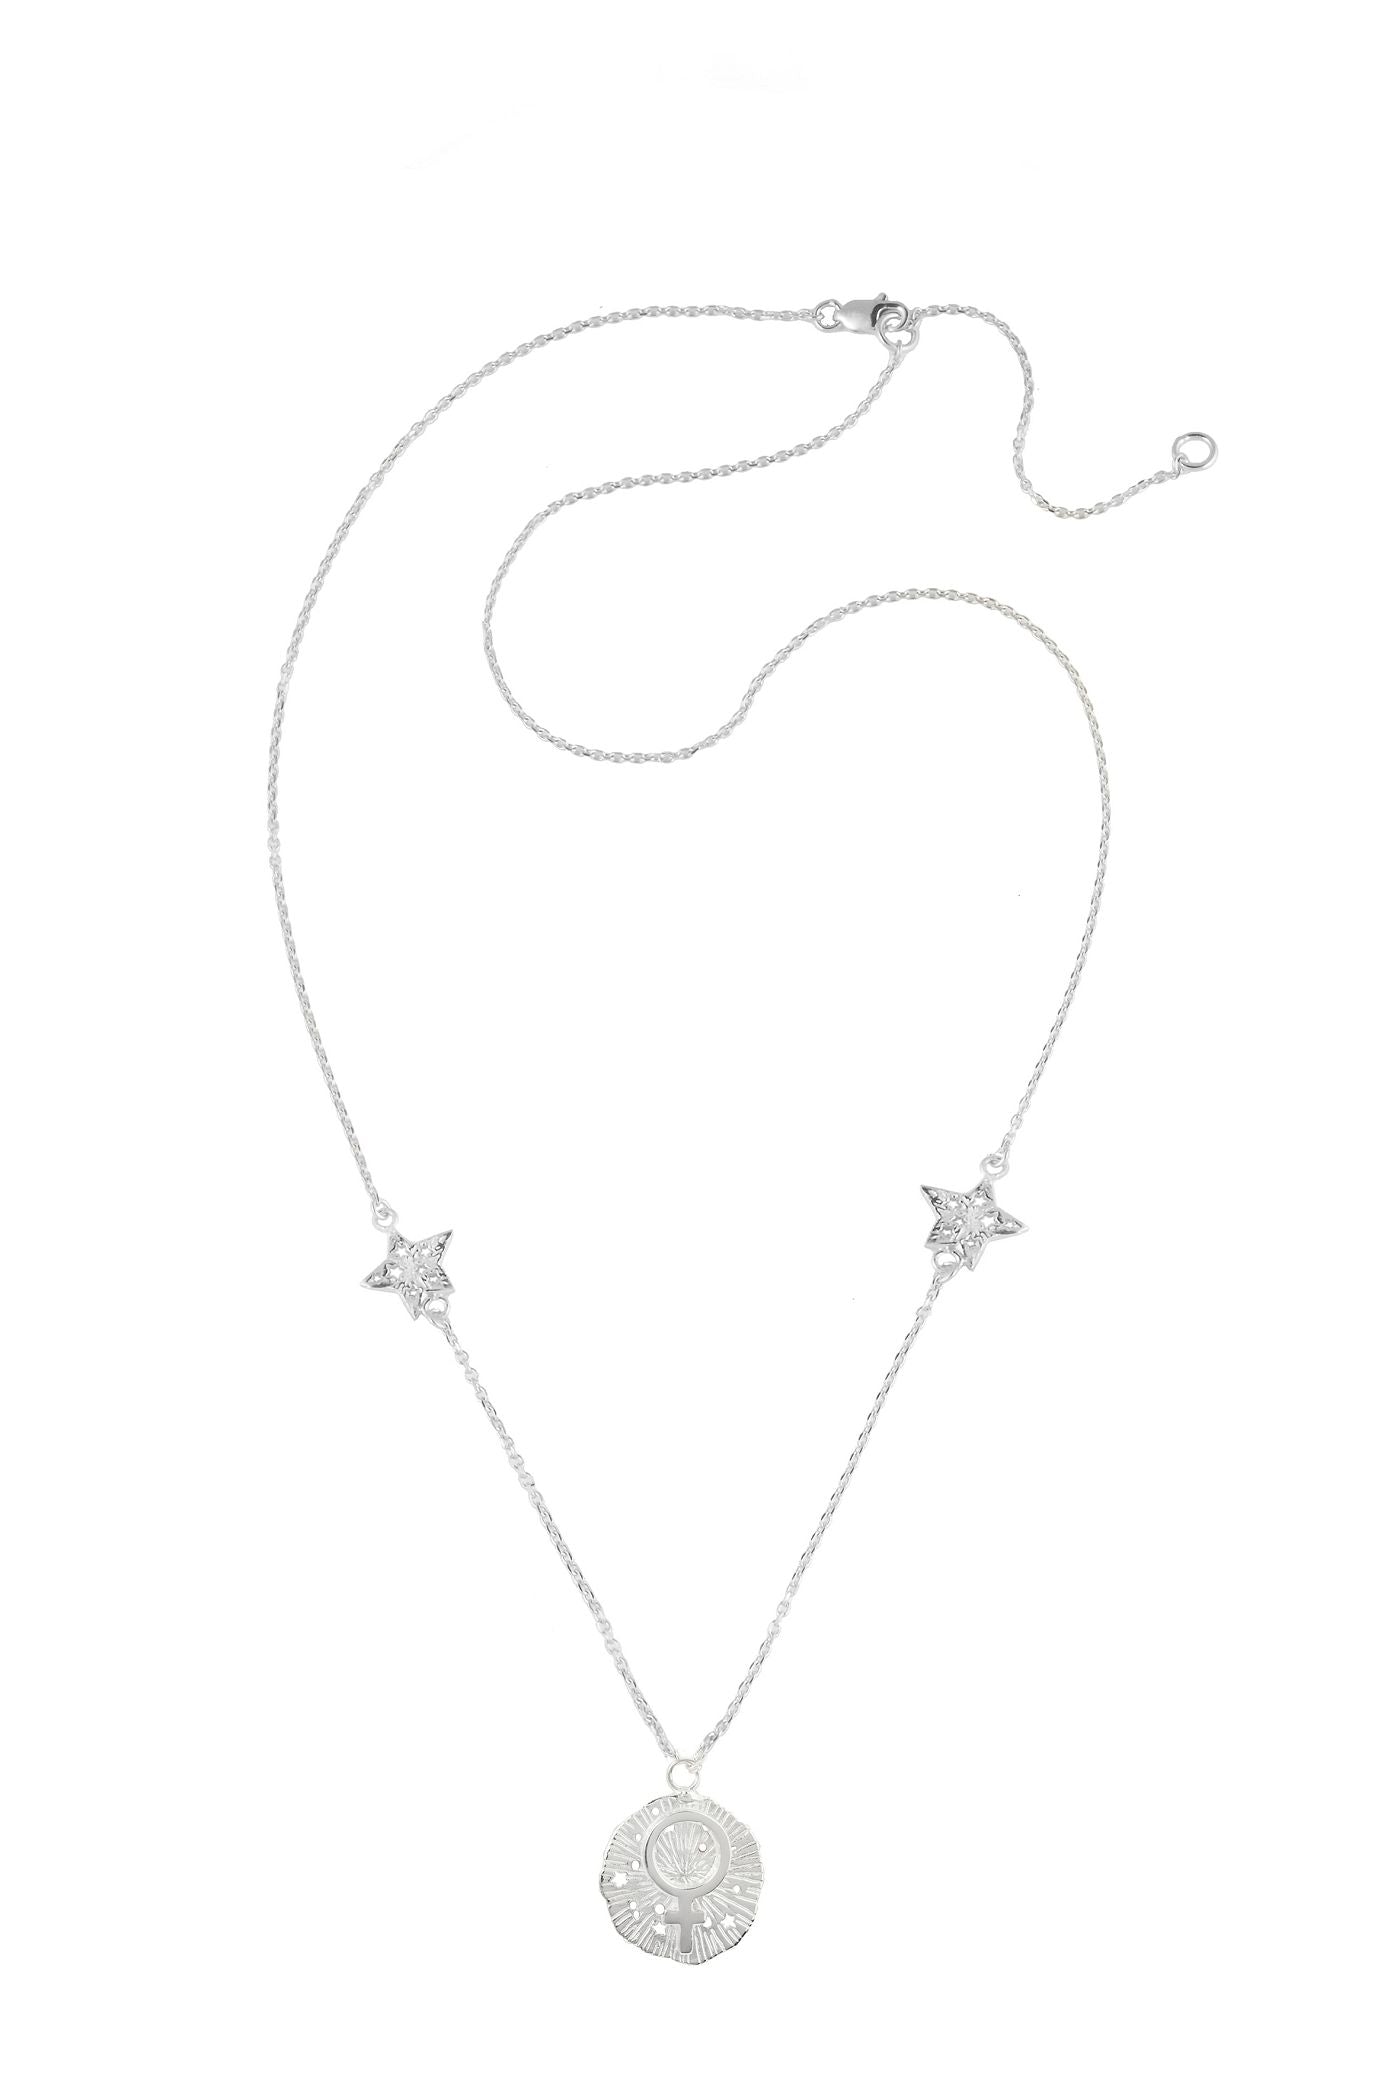 Venus with 2 stars on the chain necklace. 46 cm. Silver